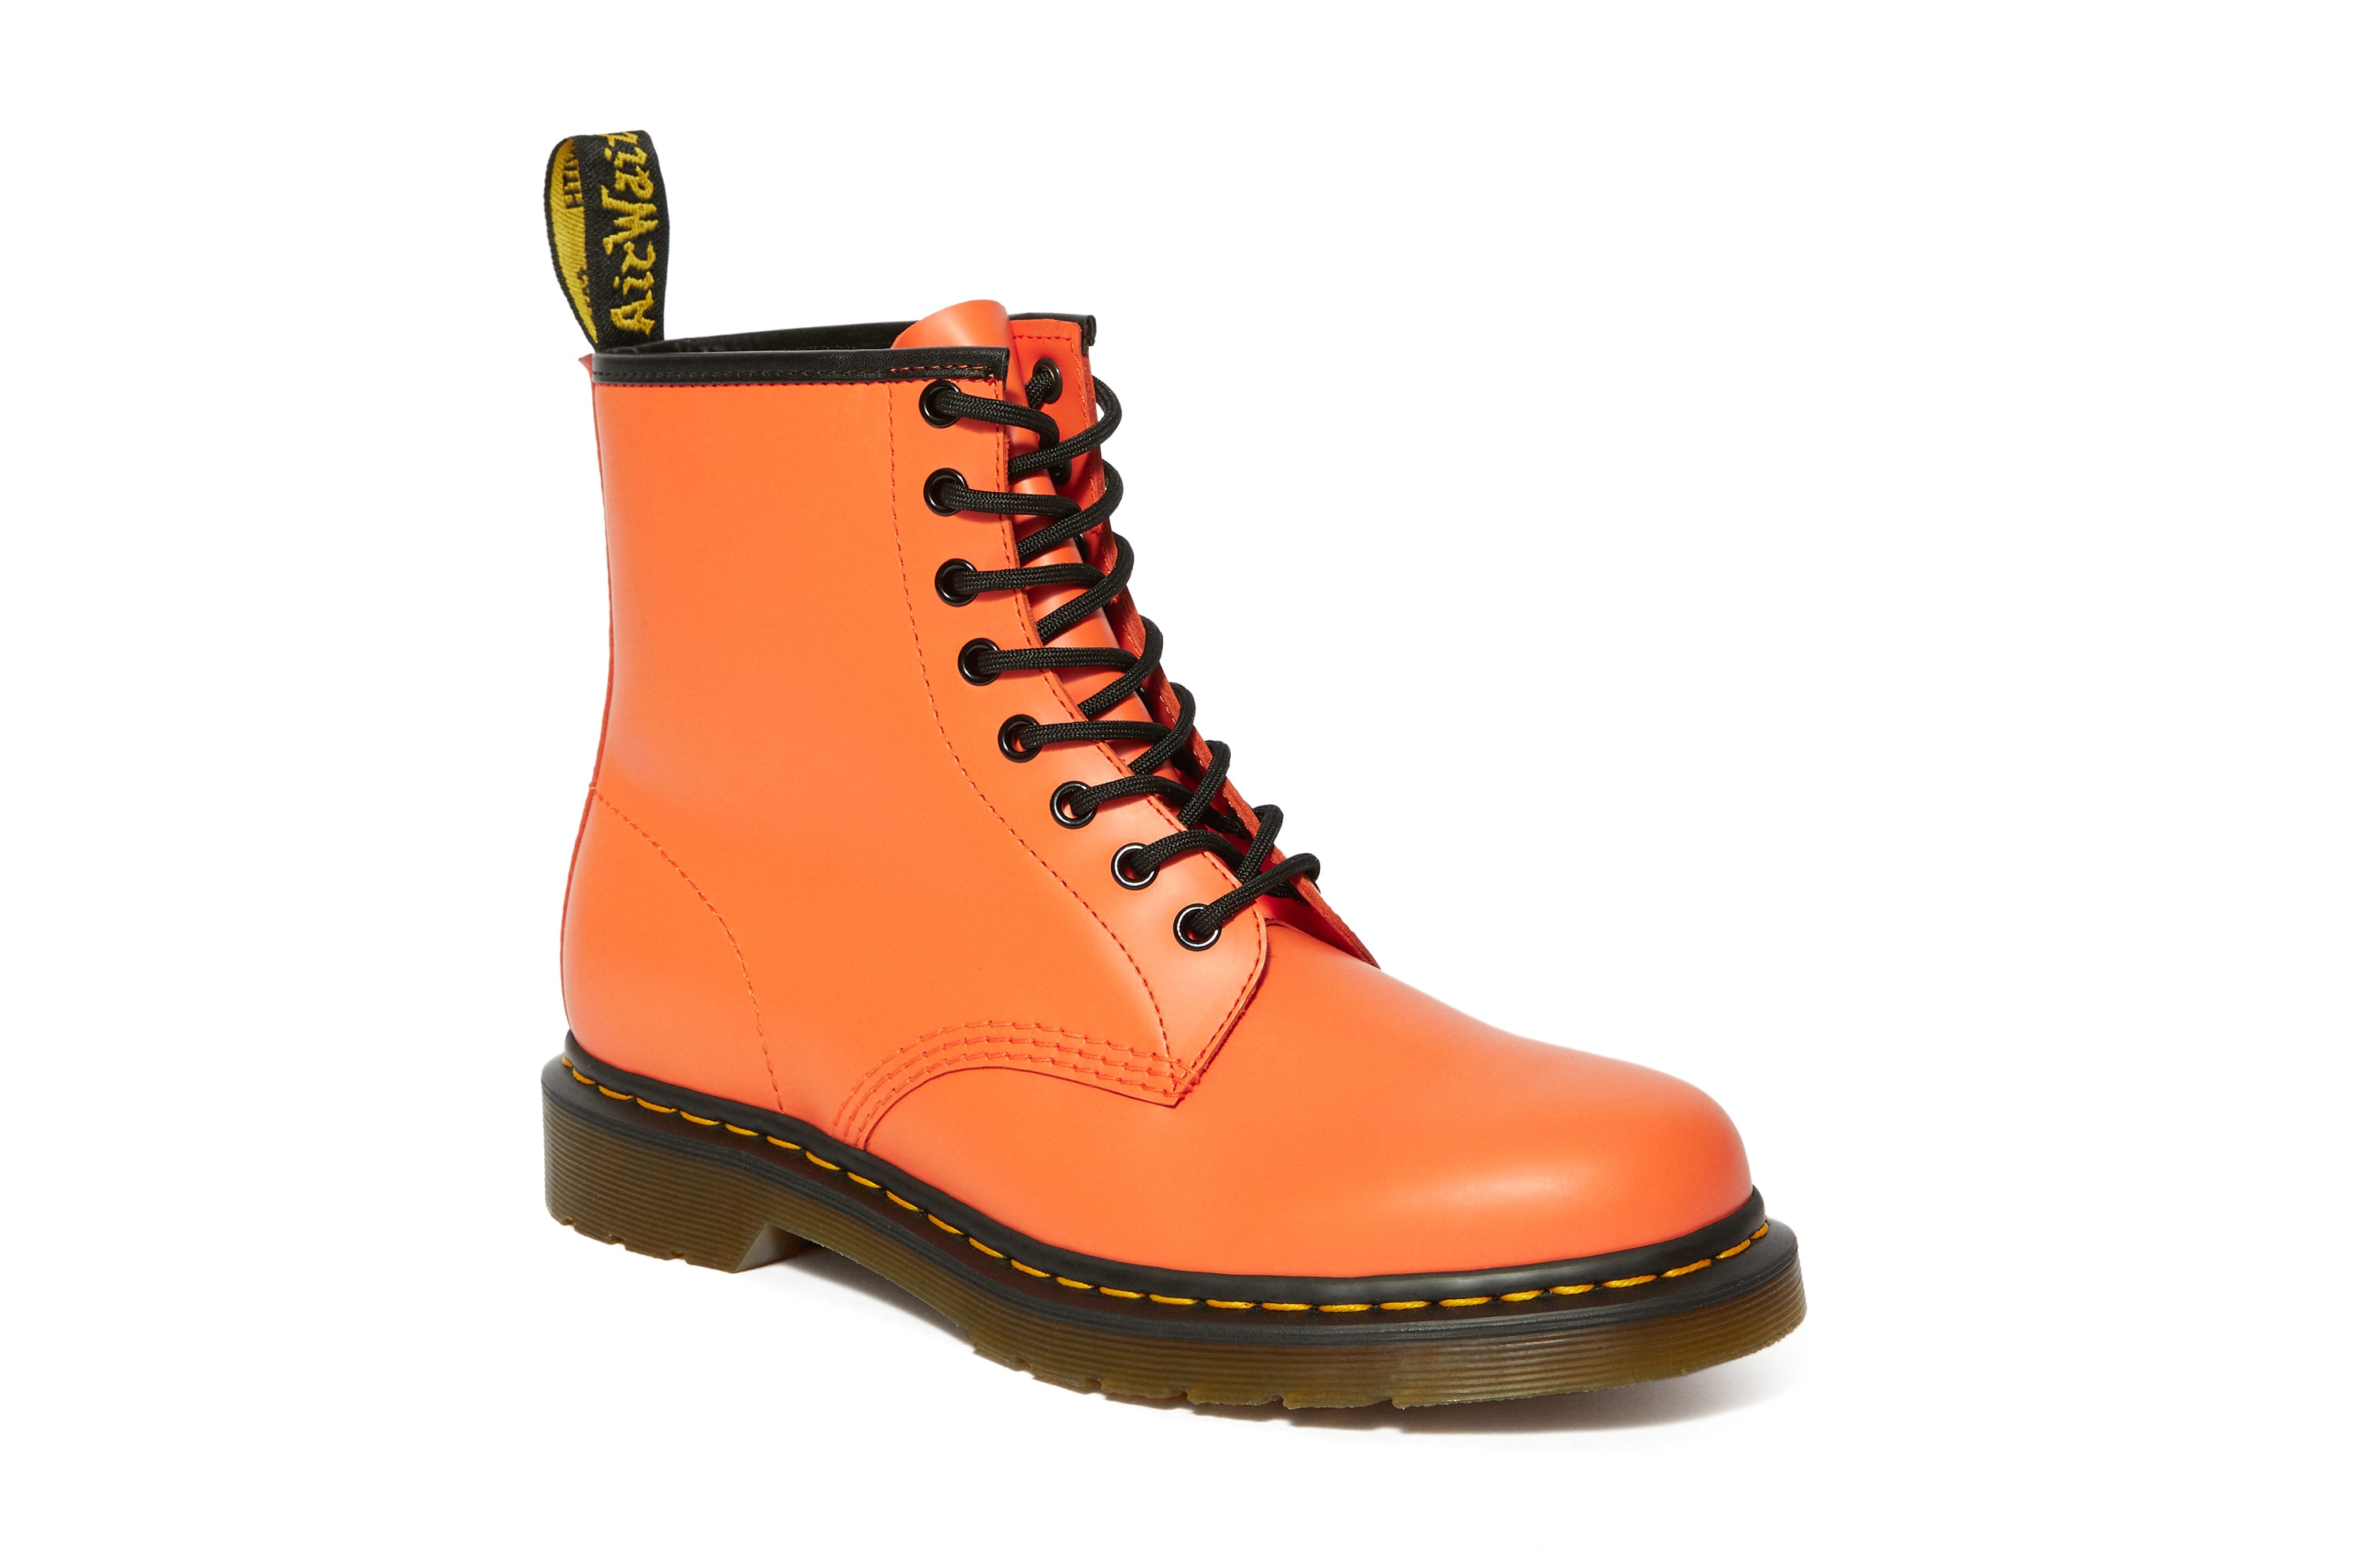 Dr. Martens Spring/Summer 1460 Boot Pink Yellow White Orange Vibrant Pastel Boots Shoes Footwear